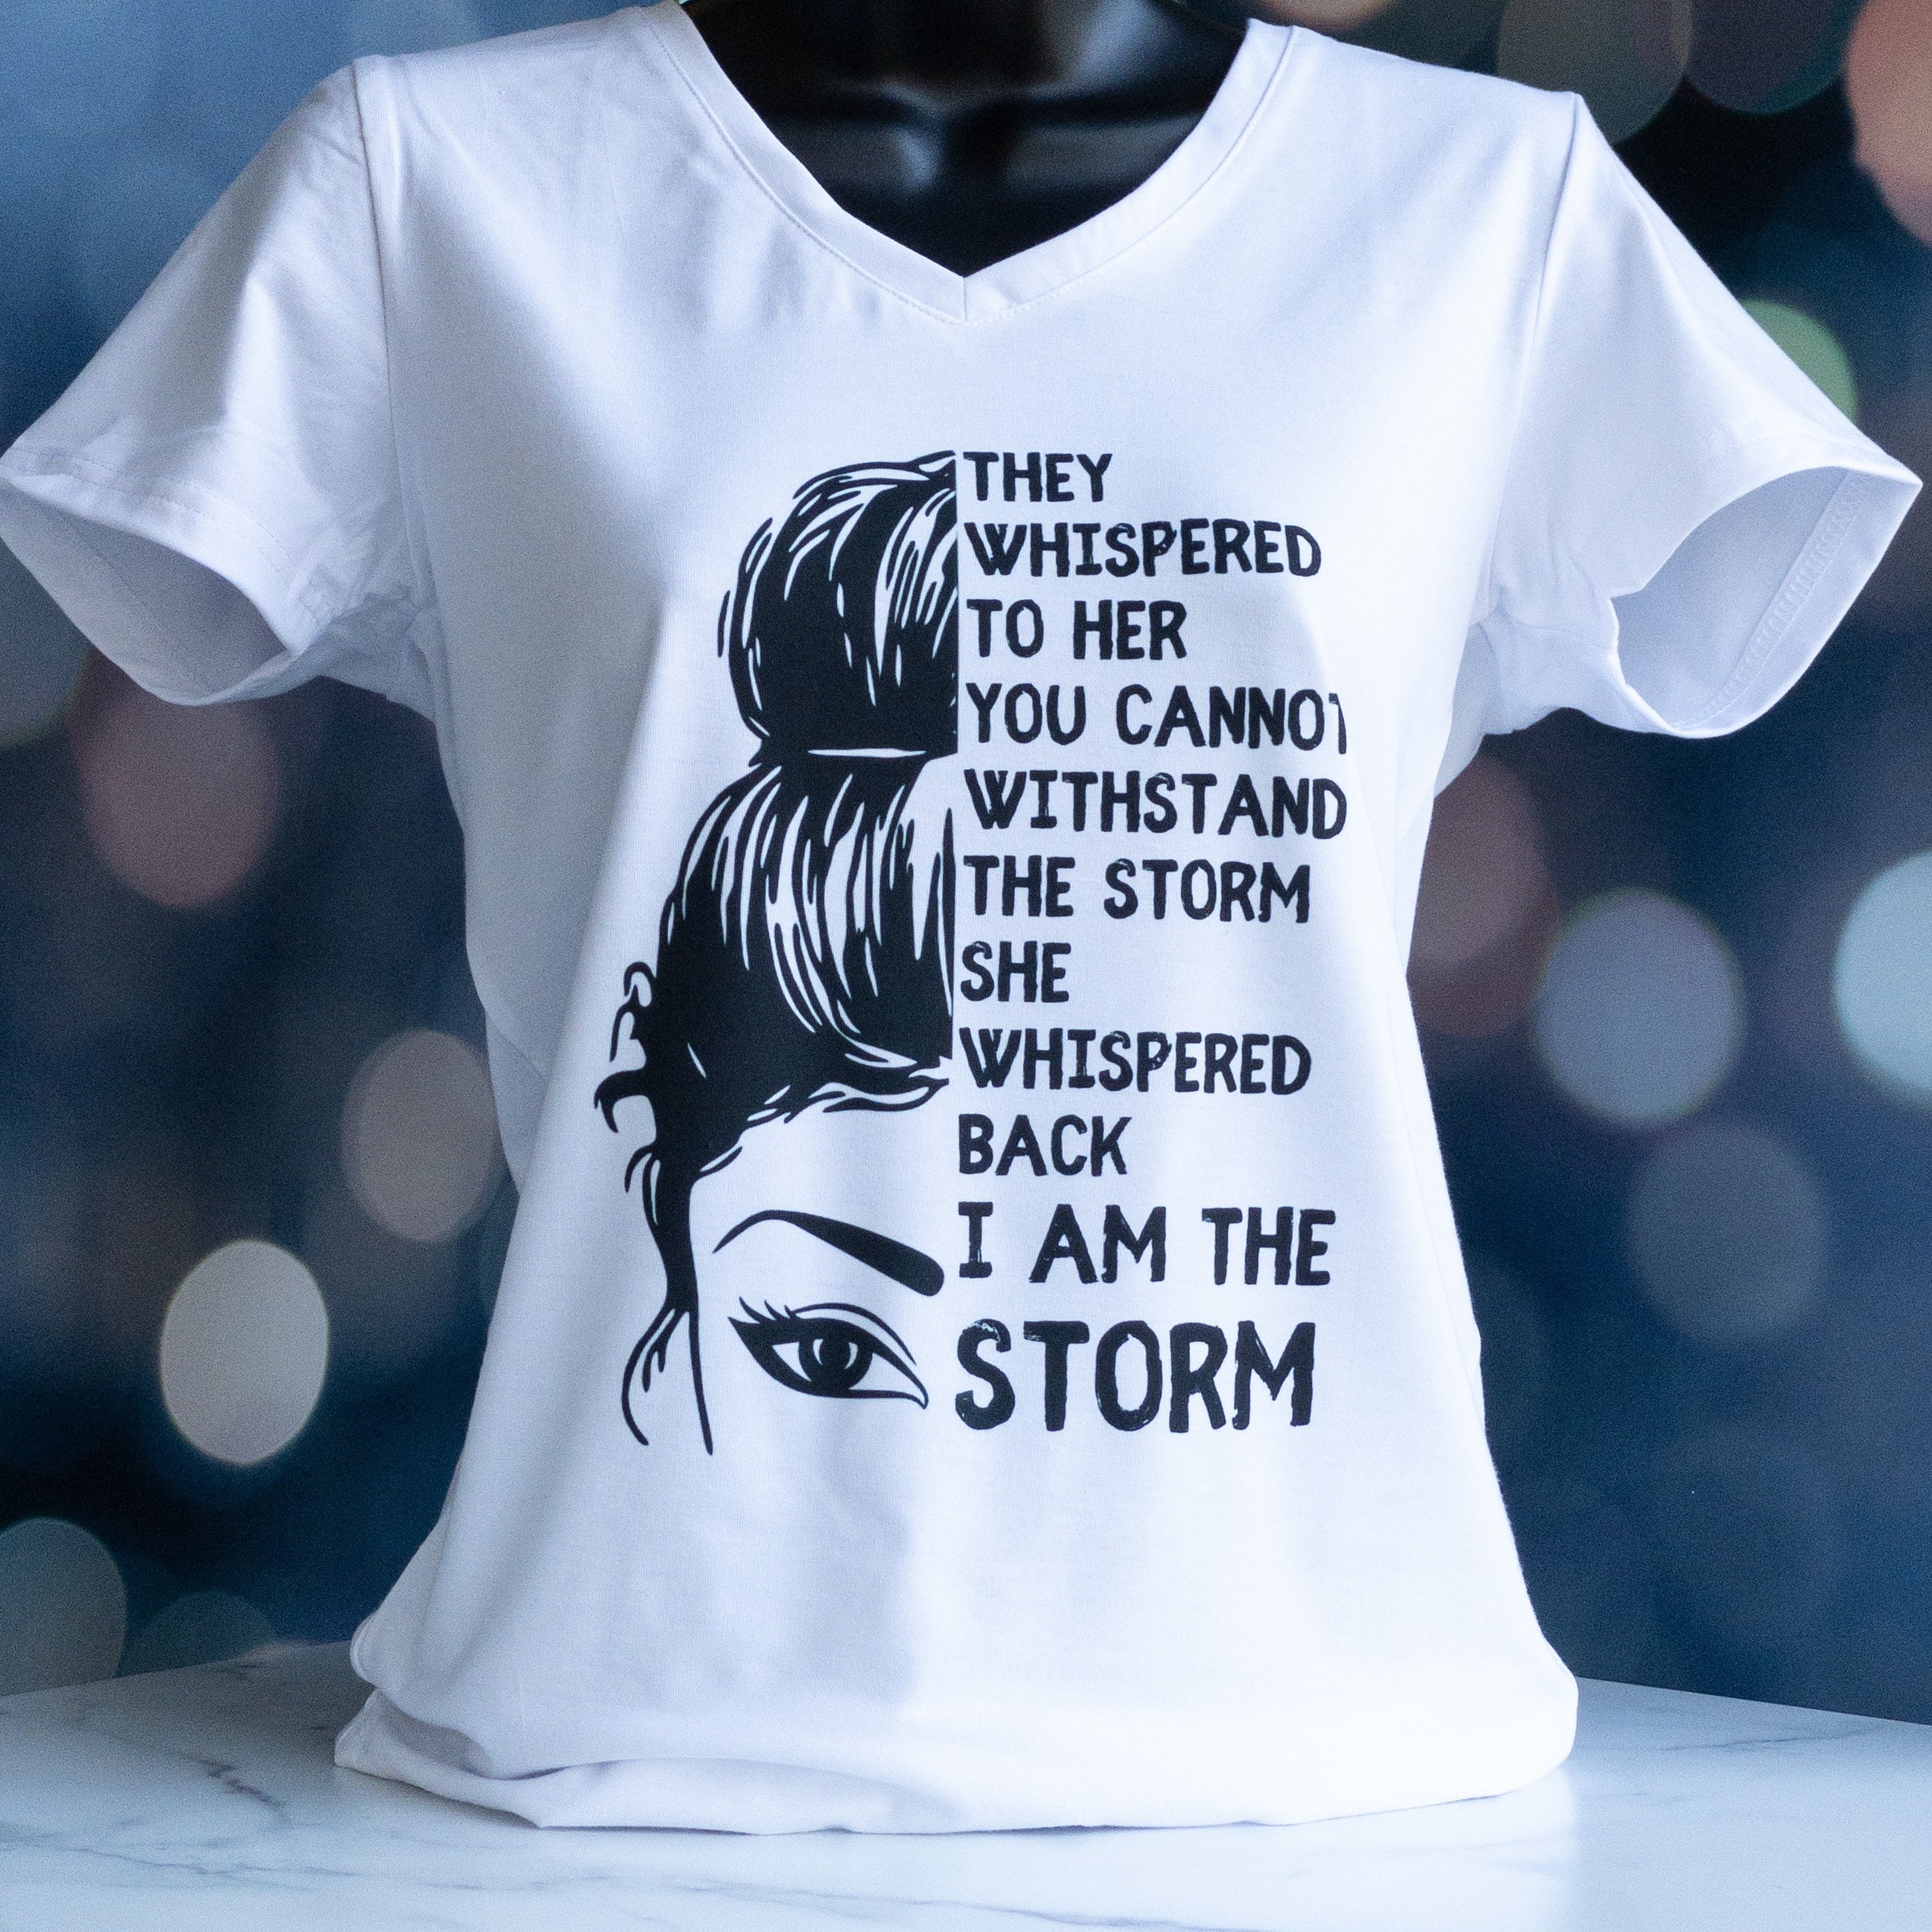 Vergil Storm T-Shirts for Sale